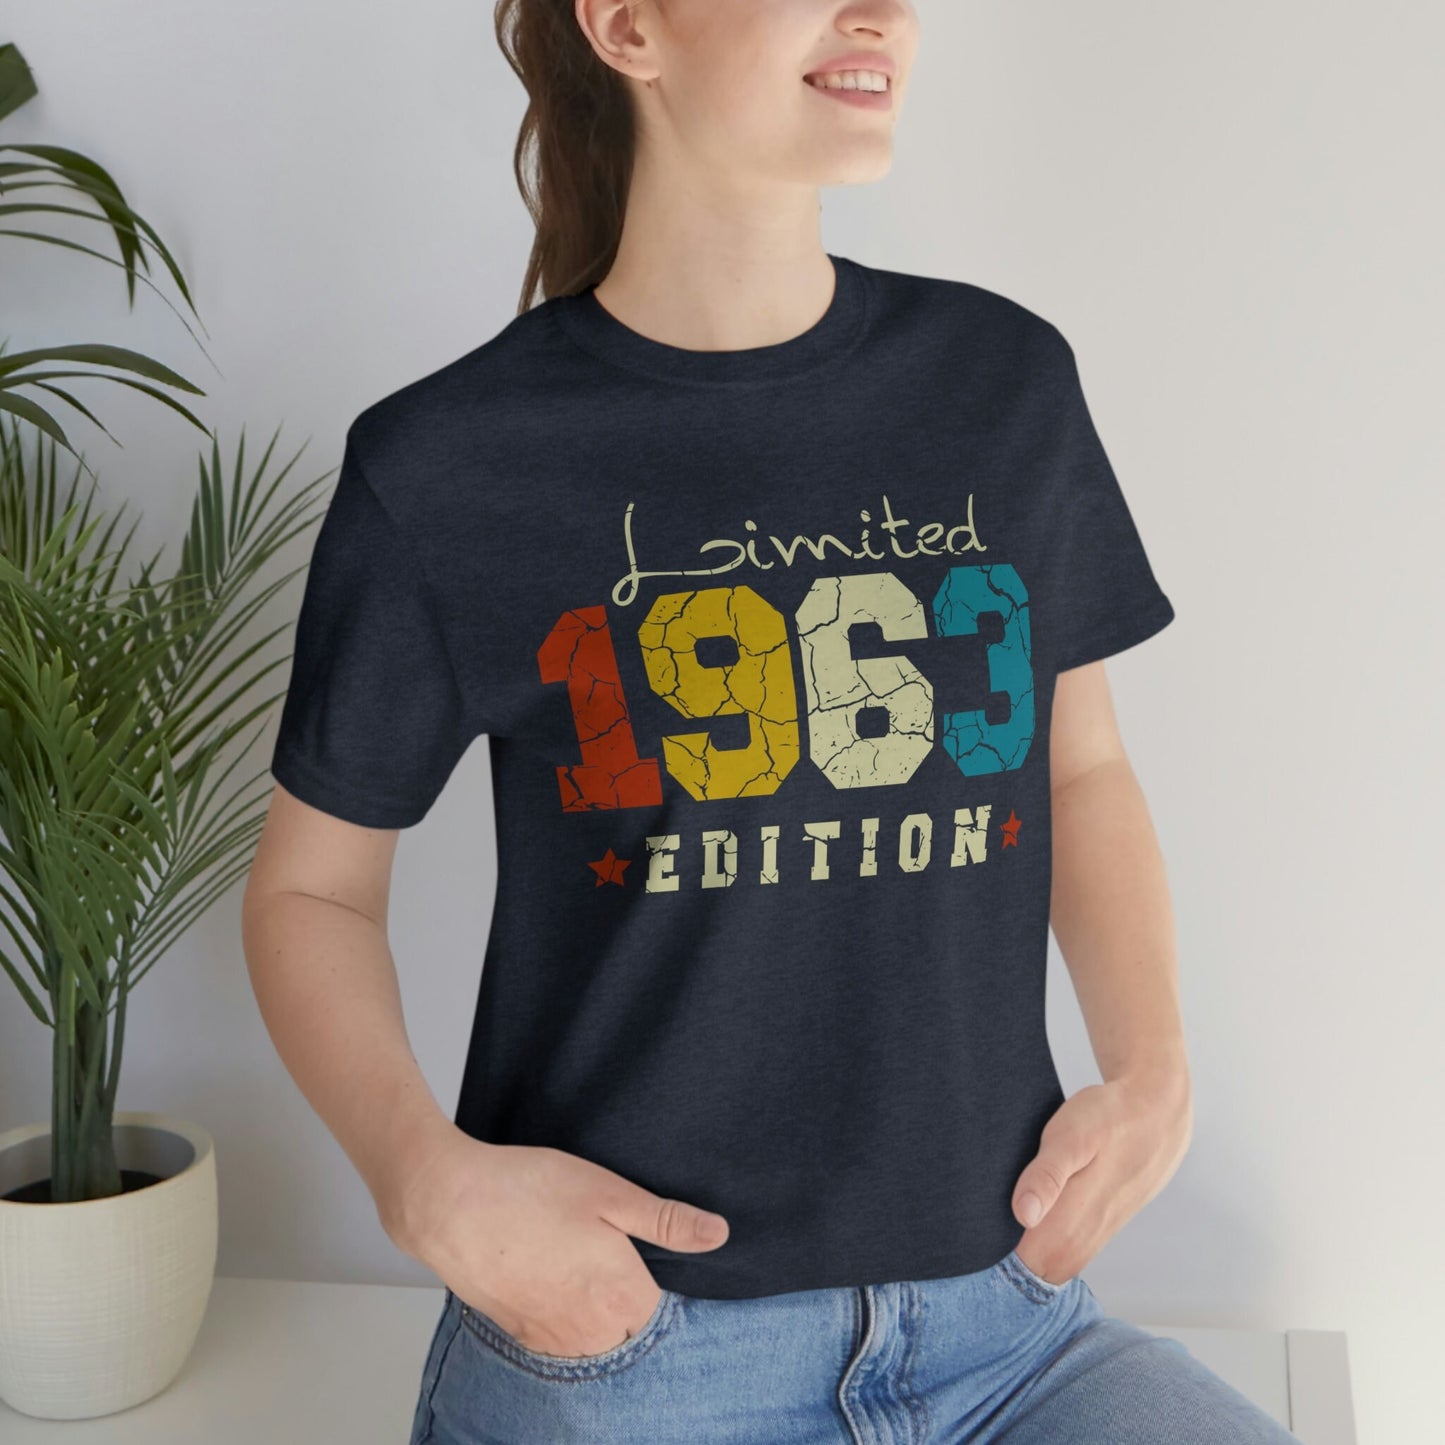 Limited 1963 Edition birthday shirt for women or men, Gift shirt for wife or husband